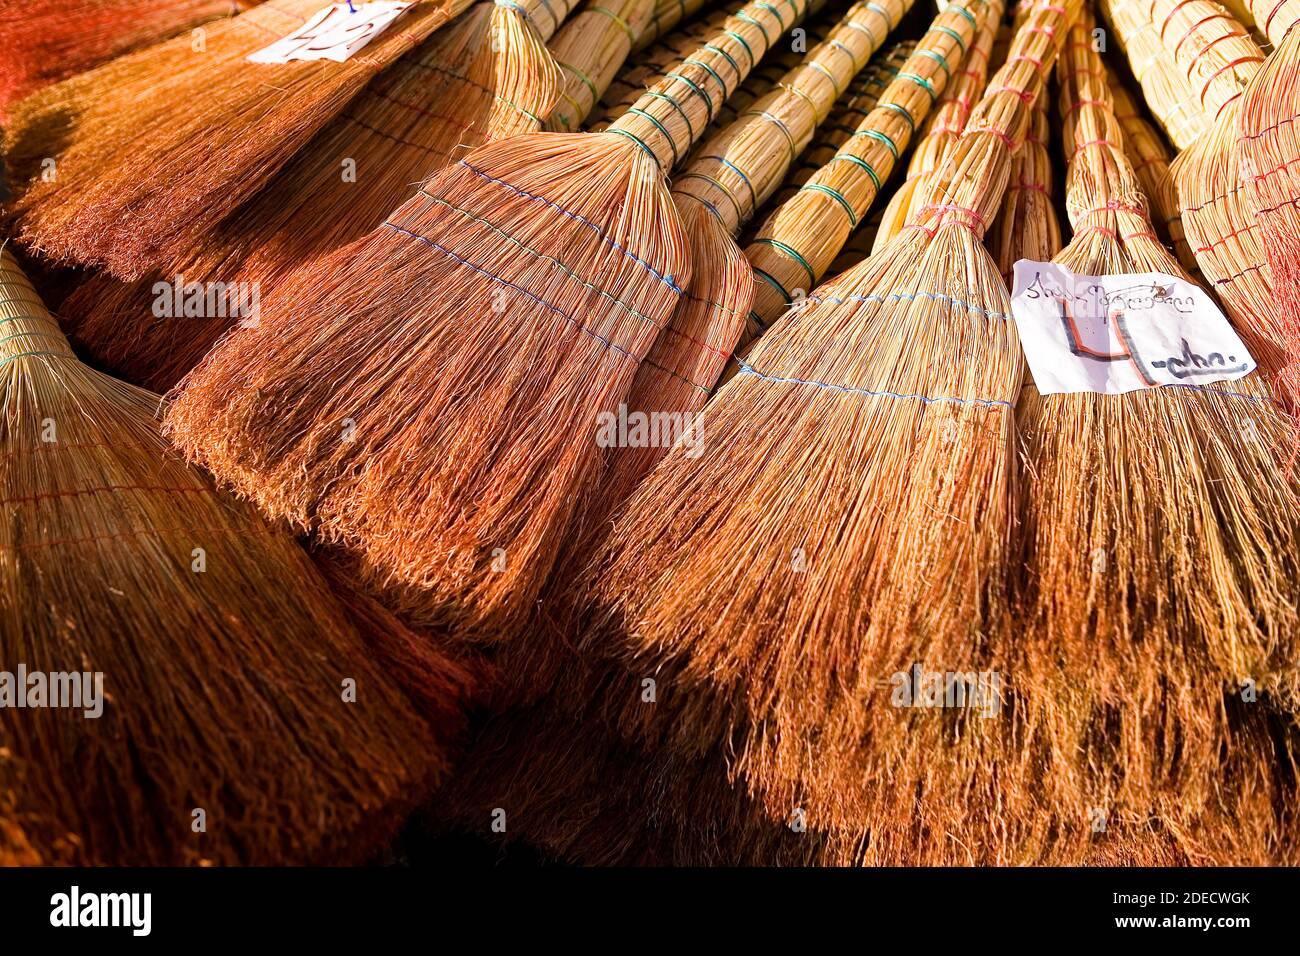 A lot of brooms for sale, on top of them lies the price tag. Georgia. Stock Photo